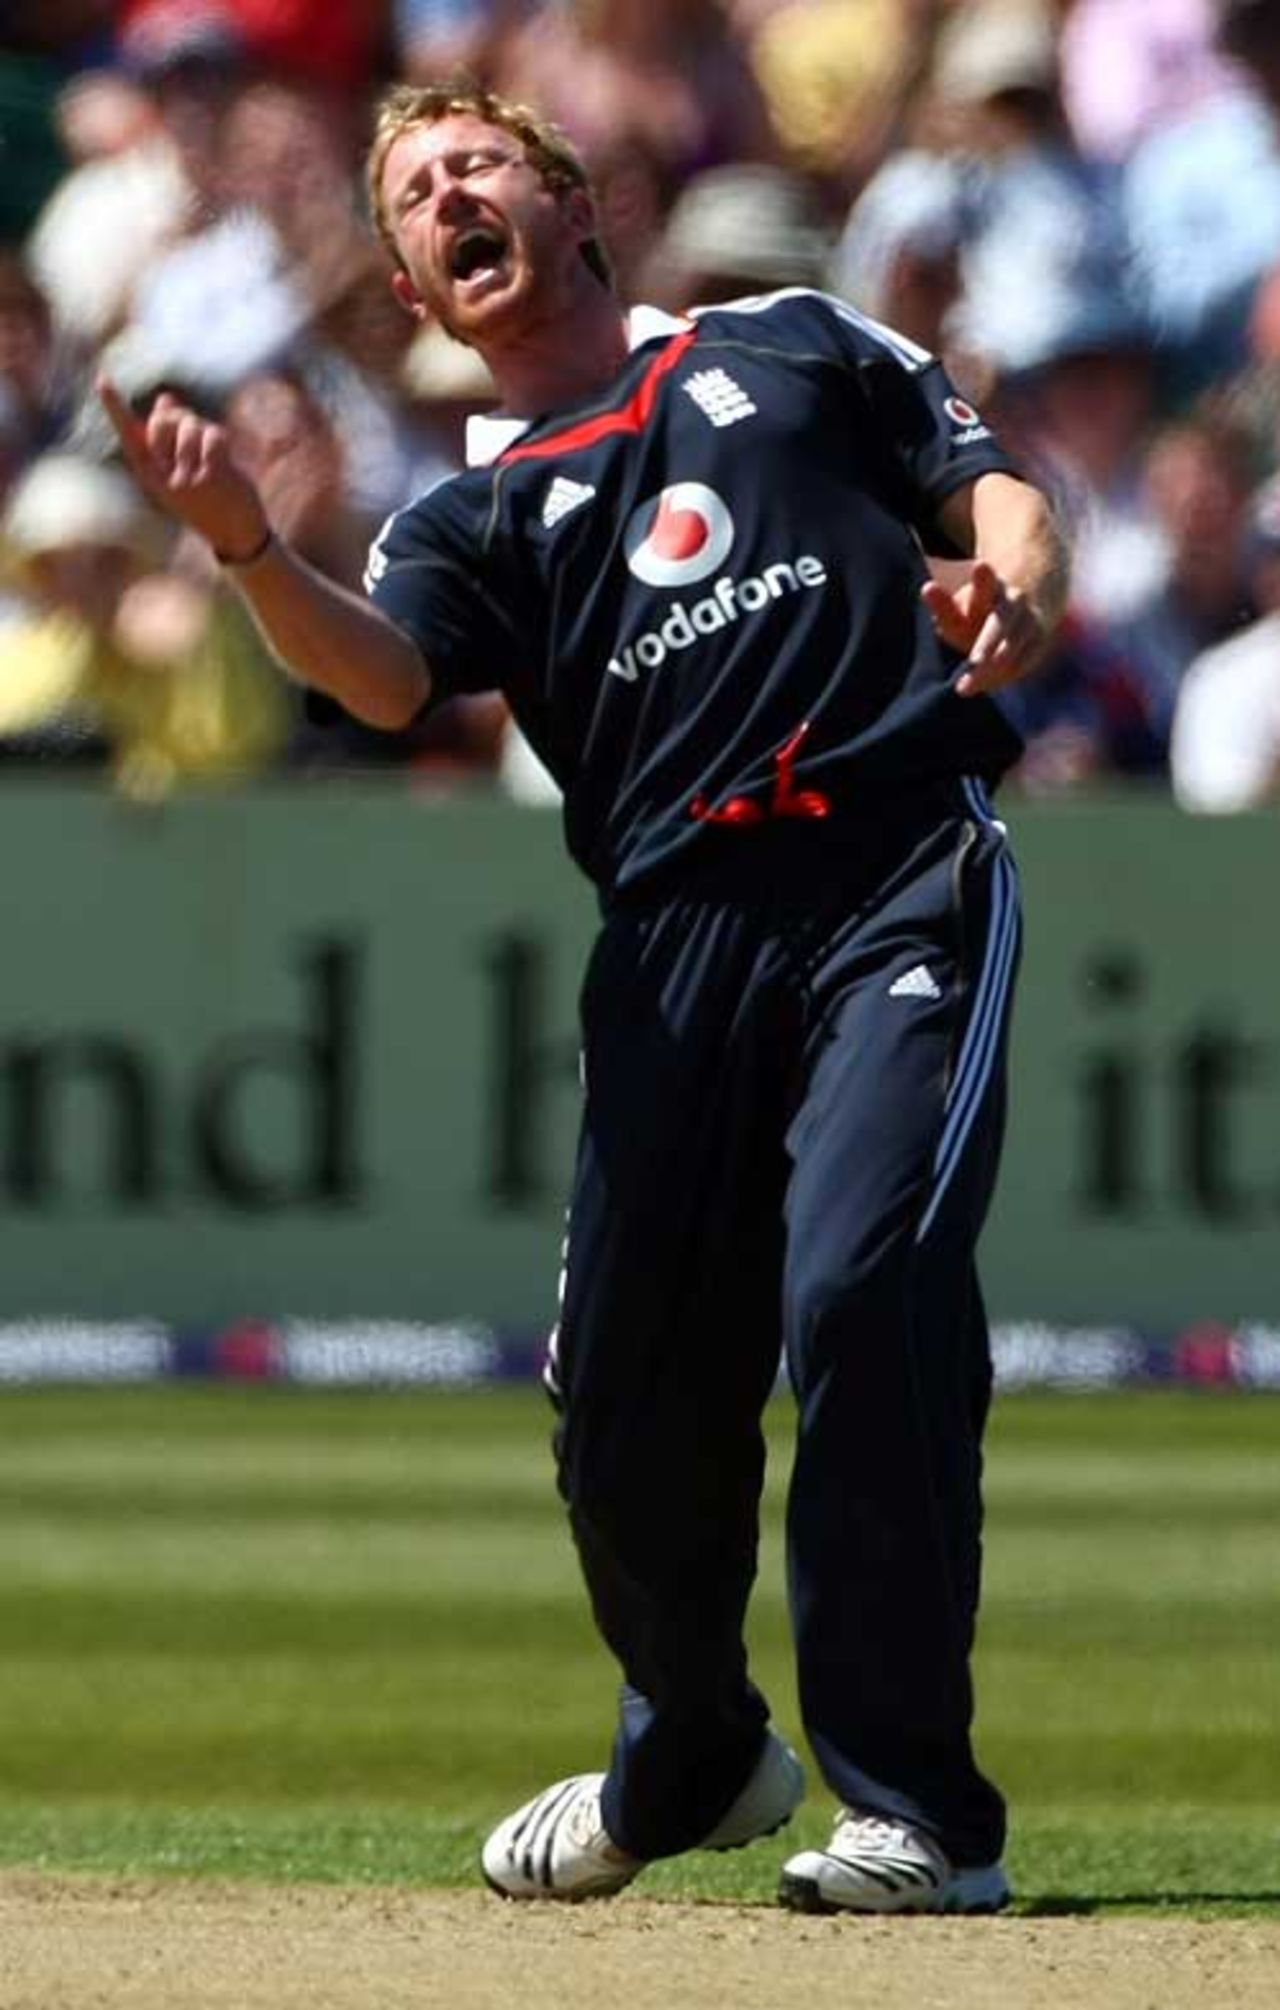 Paul Collingwood took out West Indies' middle order, England v West Indies, 2nd ODI, Bristol, May 24, 2009